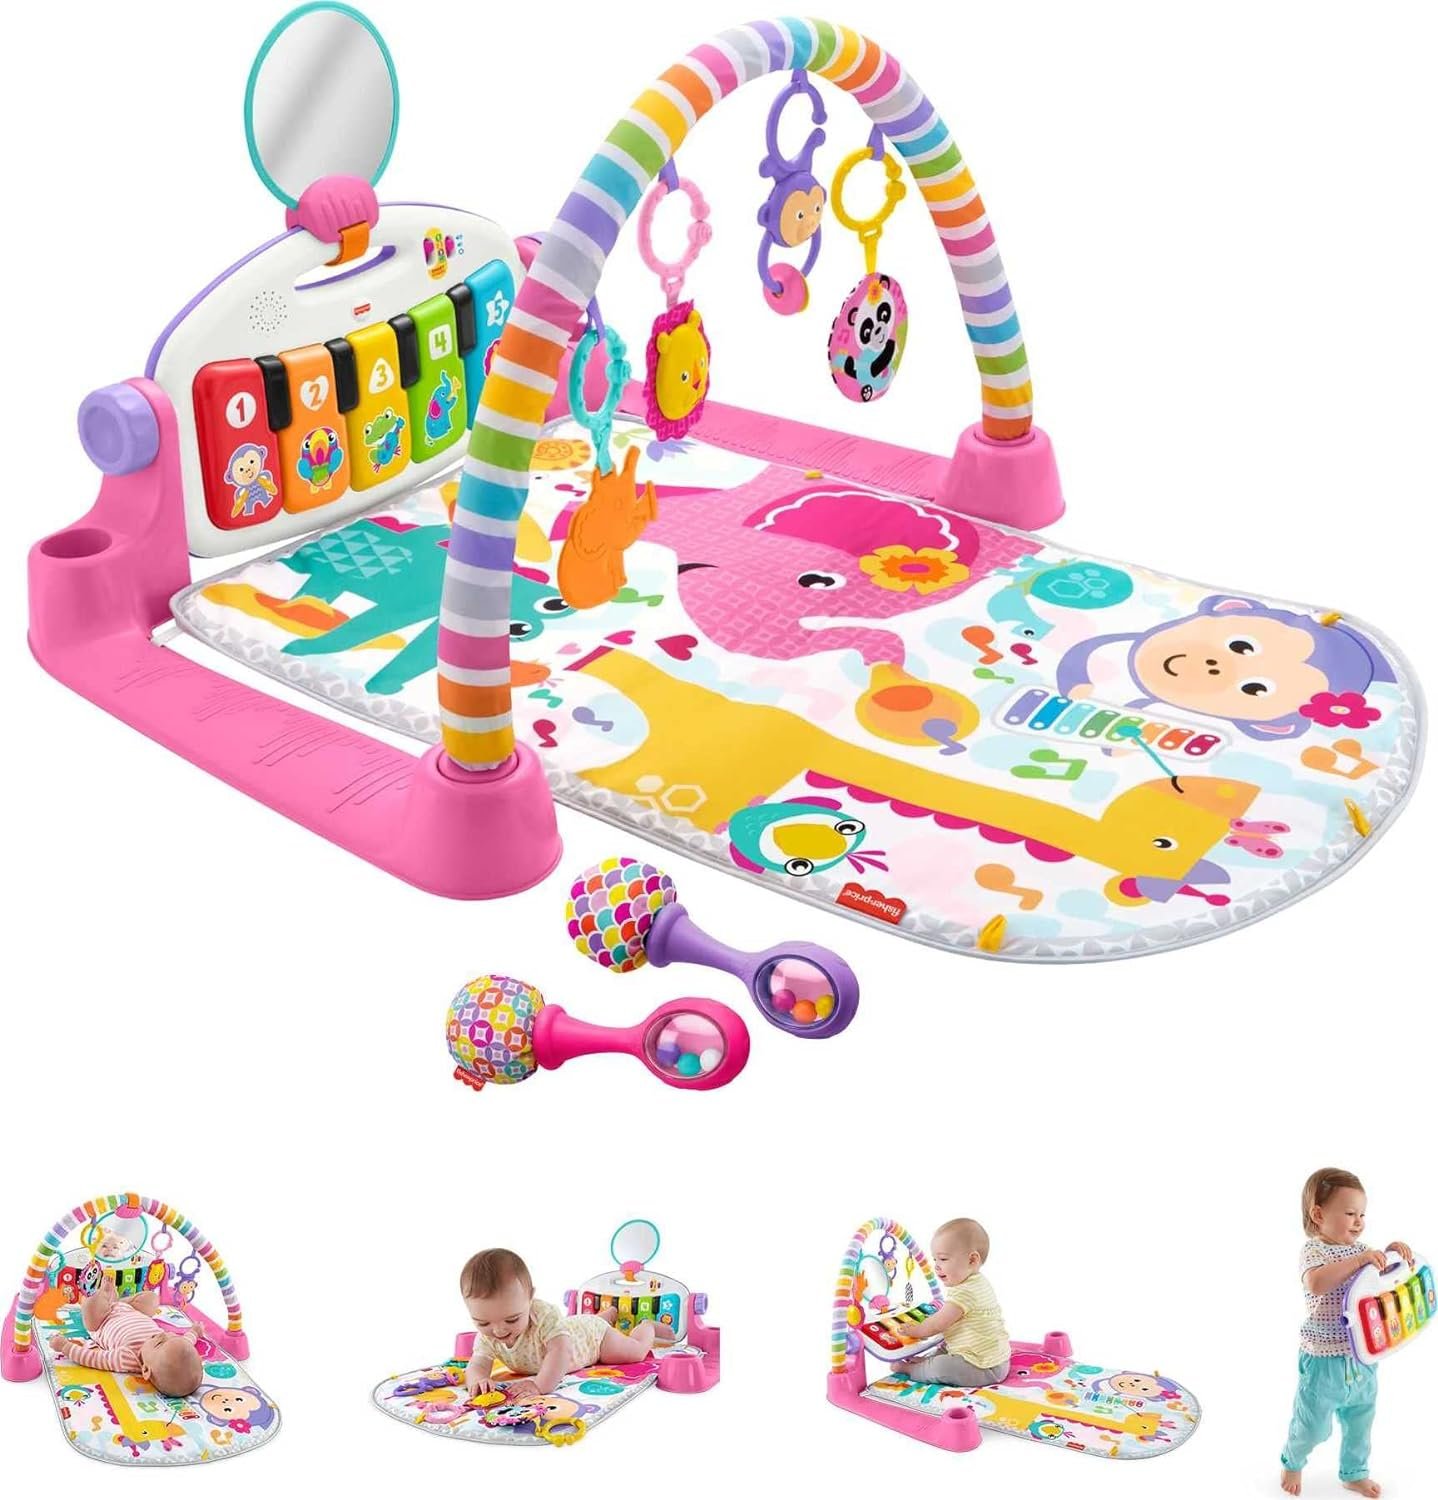 Fisher-Price Baby Gift Set Deluxe Kick  Play Piano Gym  Maracas,Playmat  Musical Toy with Smart Stages Learning Content plus 2 Rattles (Amazon Exclusive)